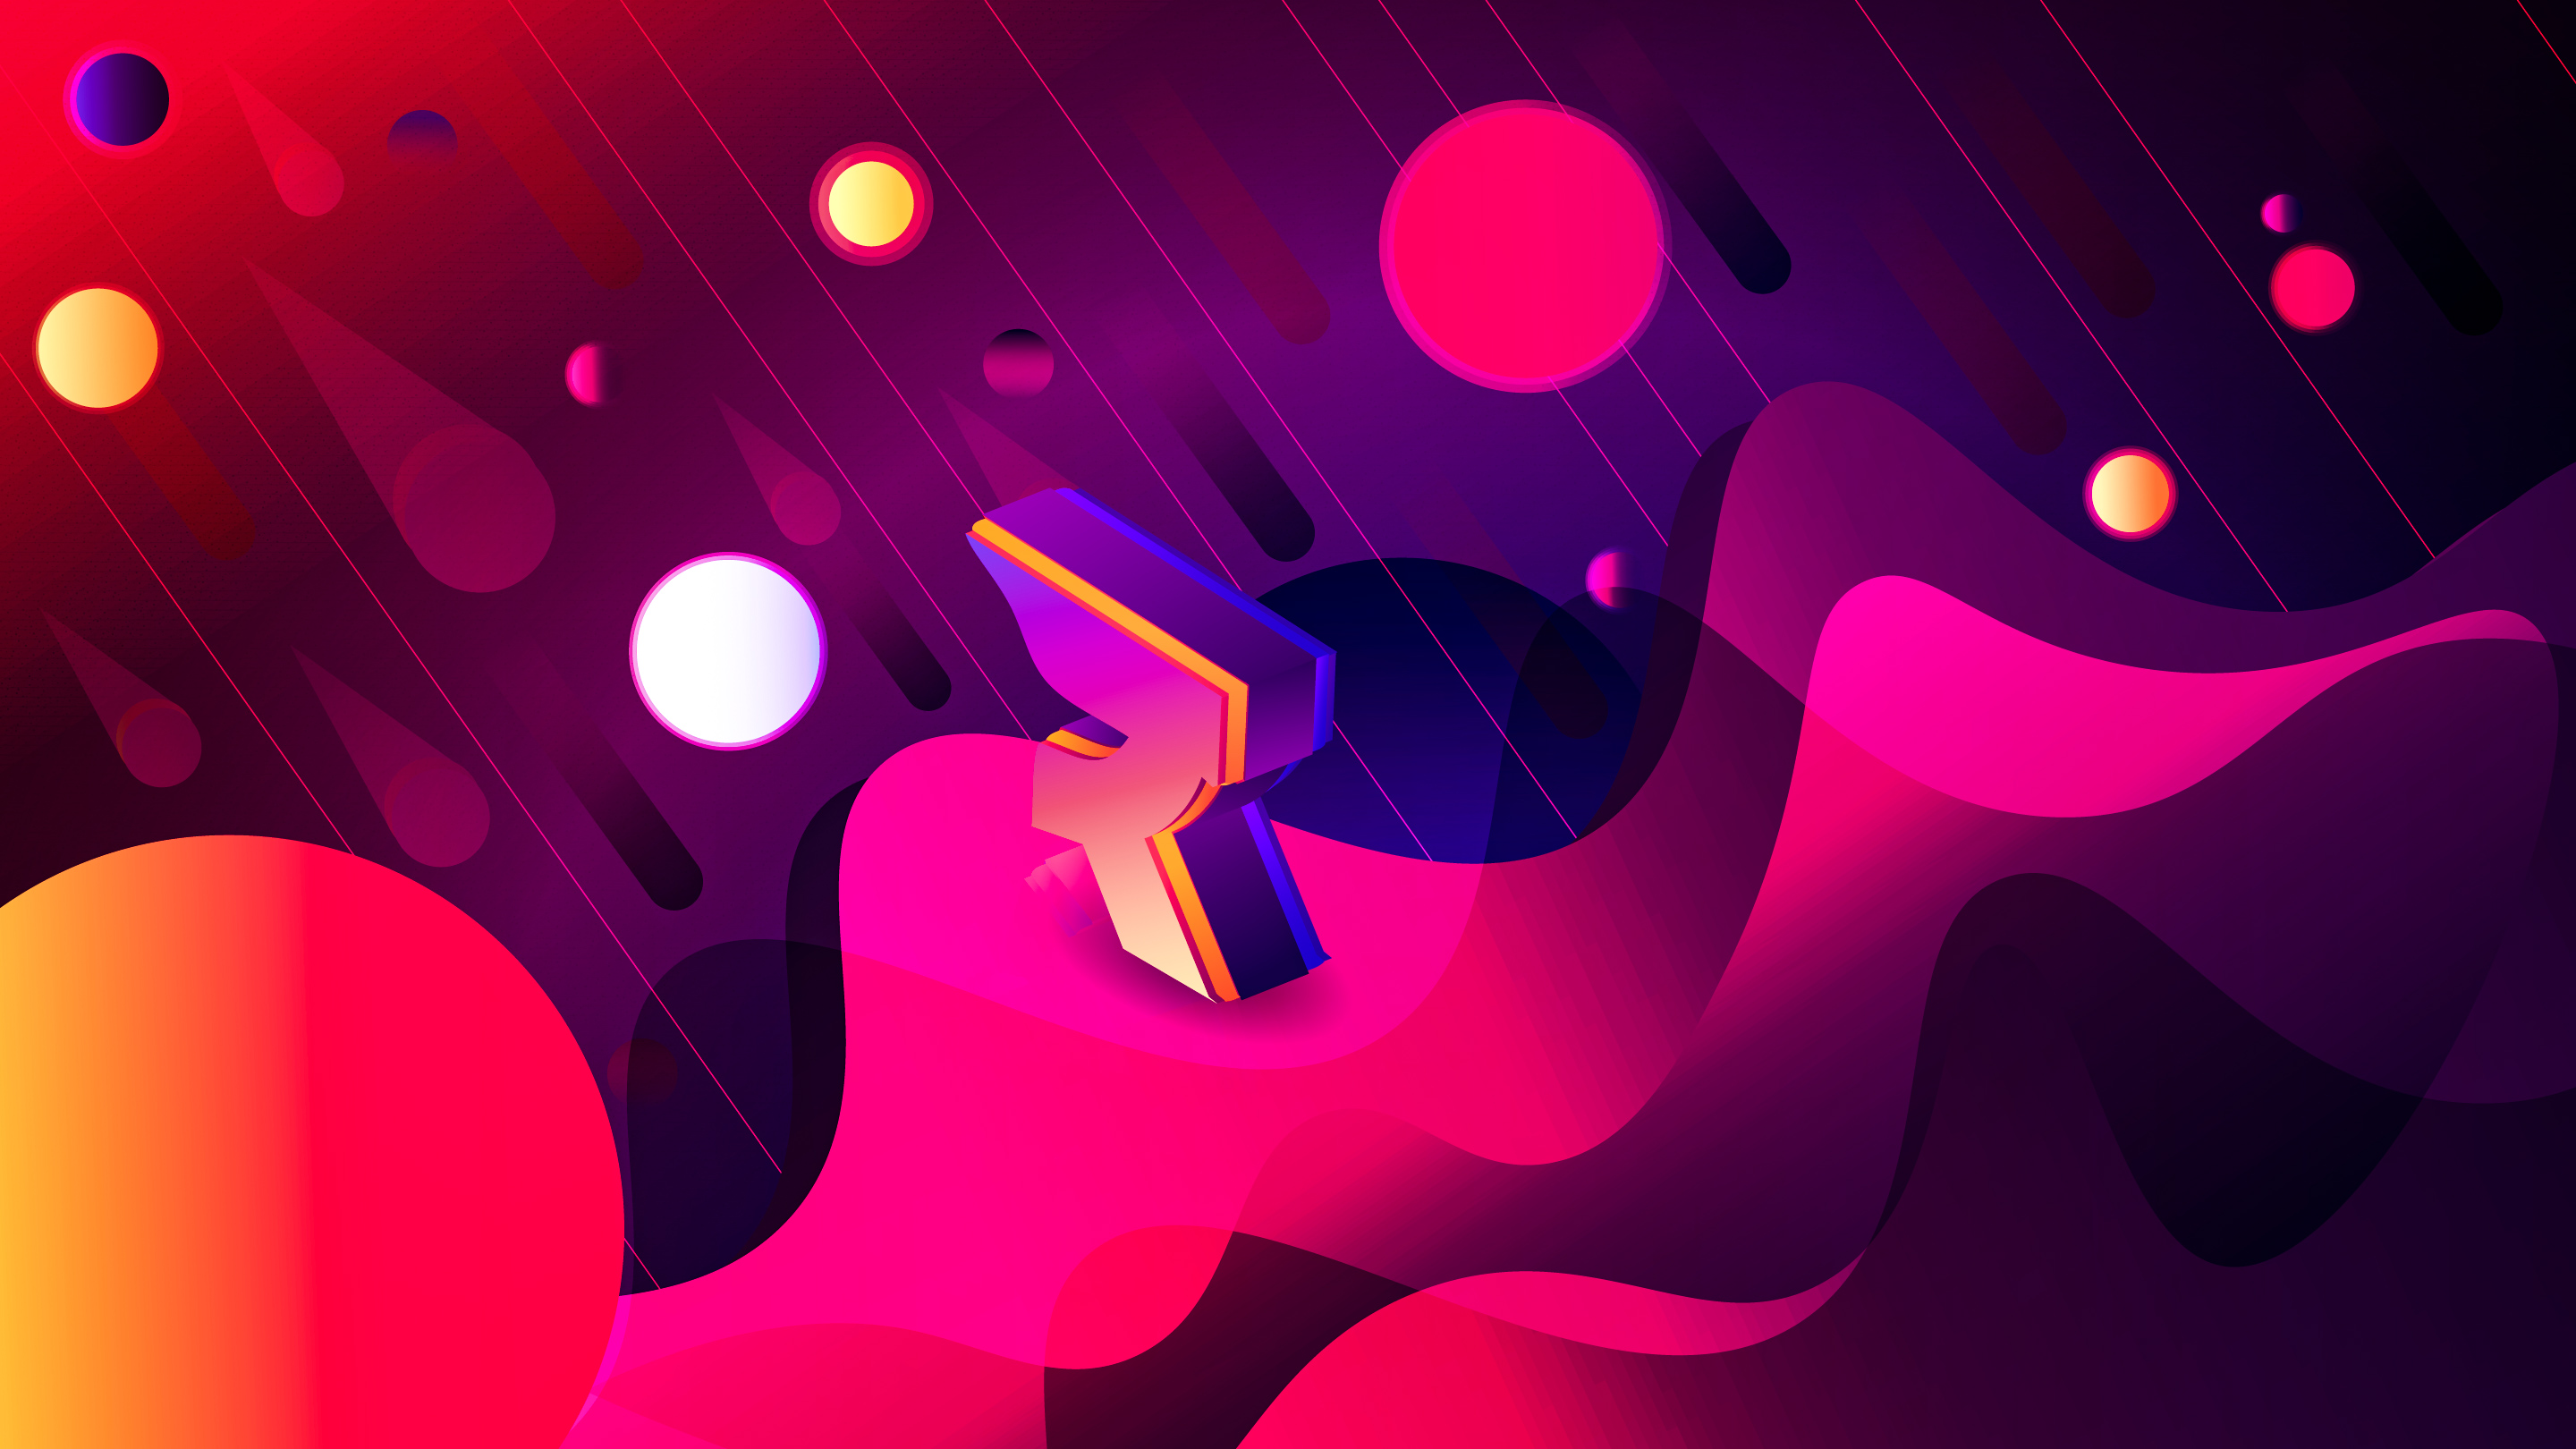 Abstract Vector Background 4k - 2880x1620 Wallpaper 